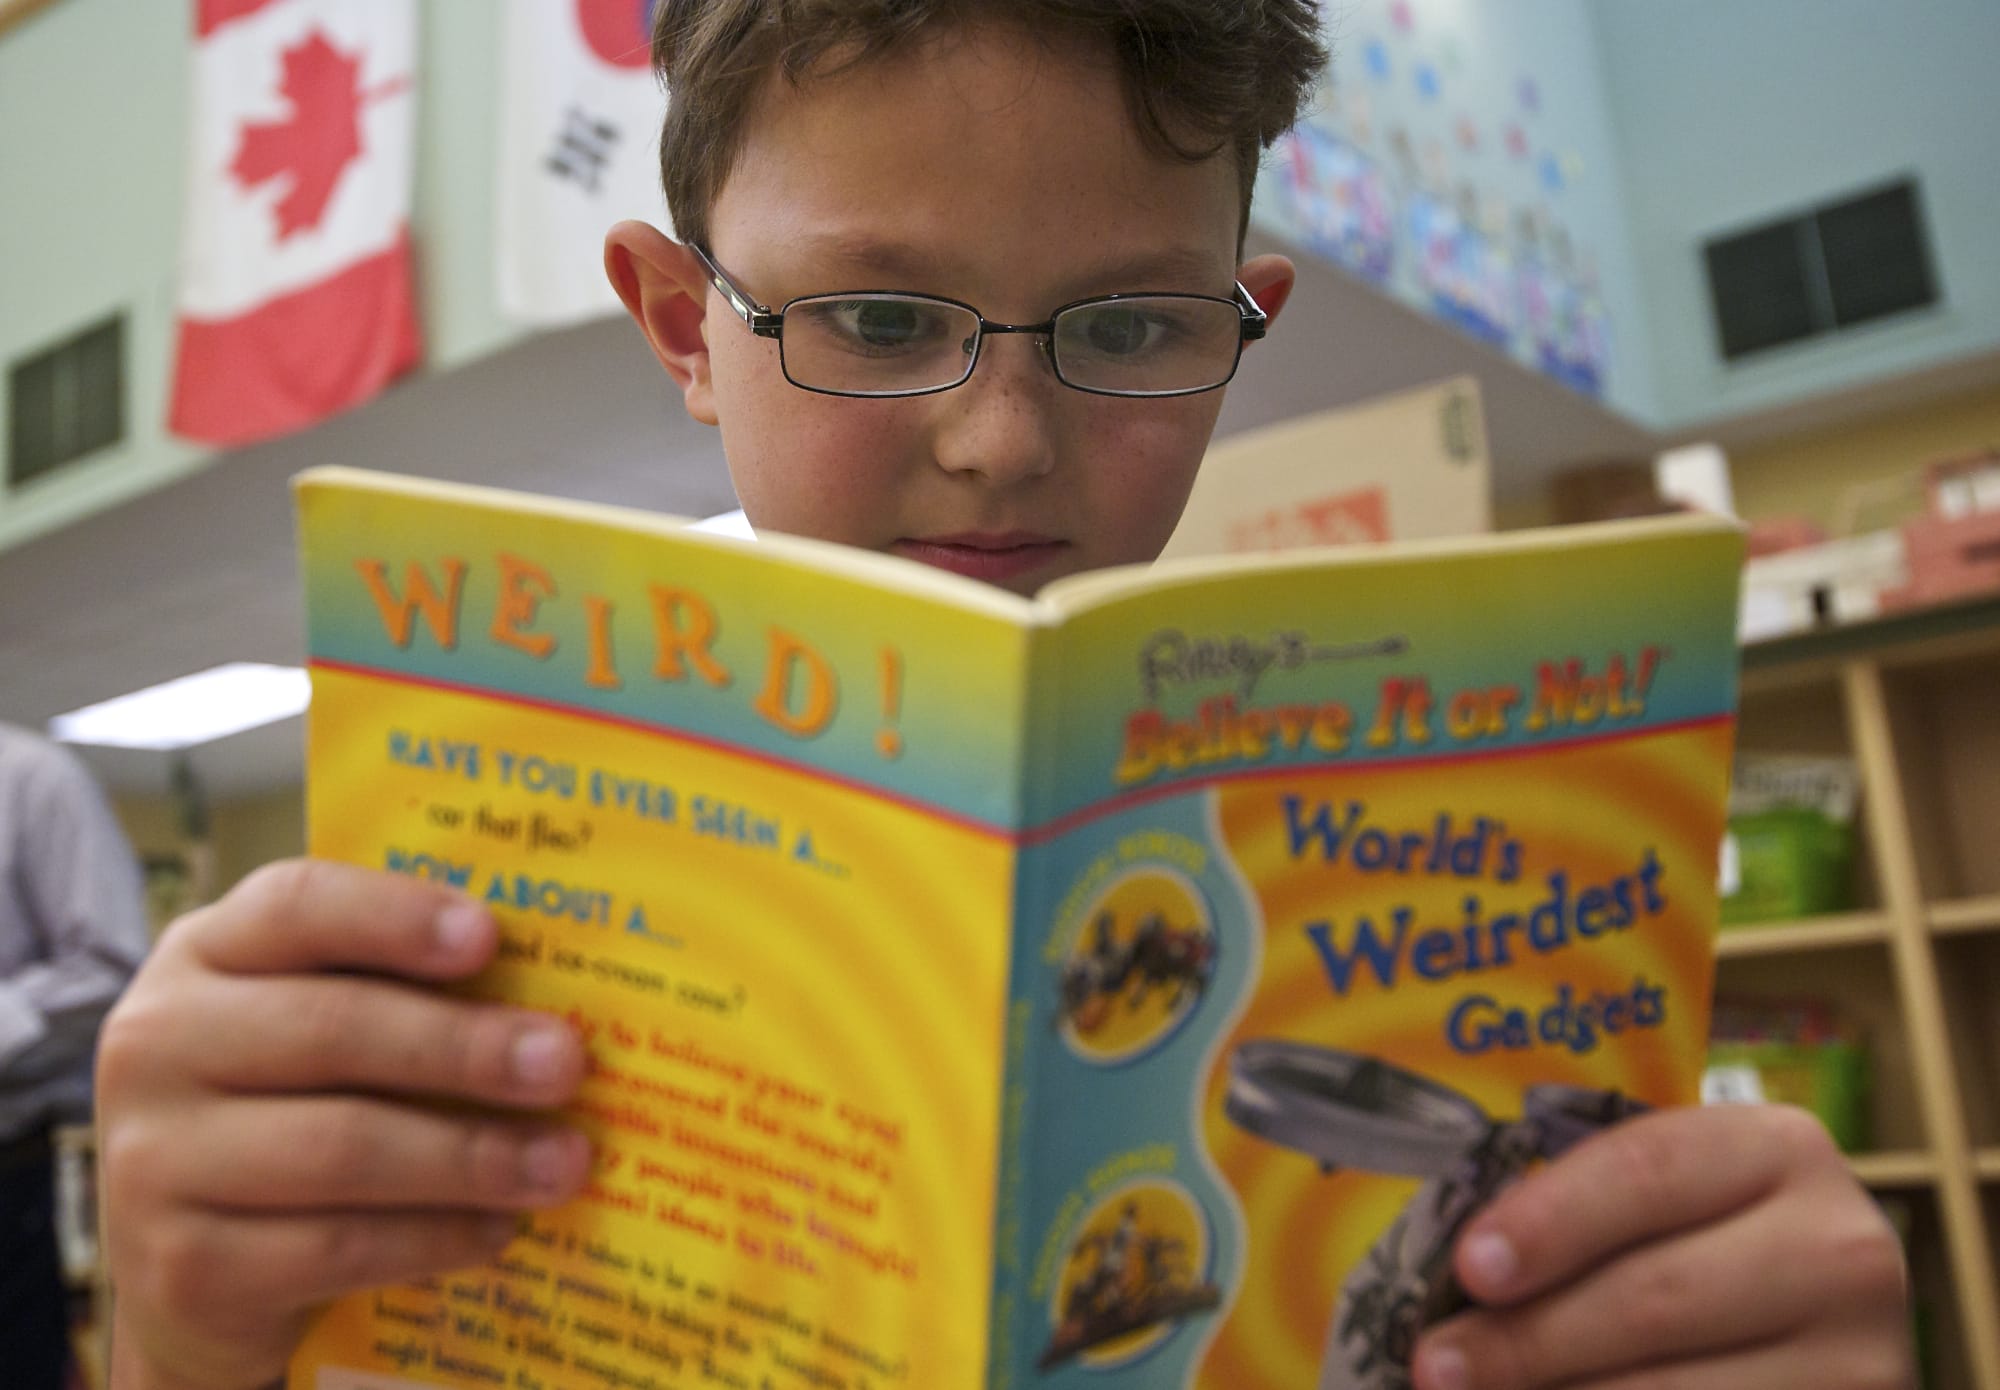 Fruit Valley Community Learning Center fourth-grader Anubis Bicknell-Farrar, 9, chose &quot;Ripley's Believe It or Not! World's Weirdest Gadgets&quot; as one of two books he was given Friday by Goodwill's Book of My Own program. A section in the book about robots got Anubis fired up.